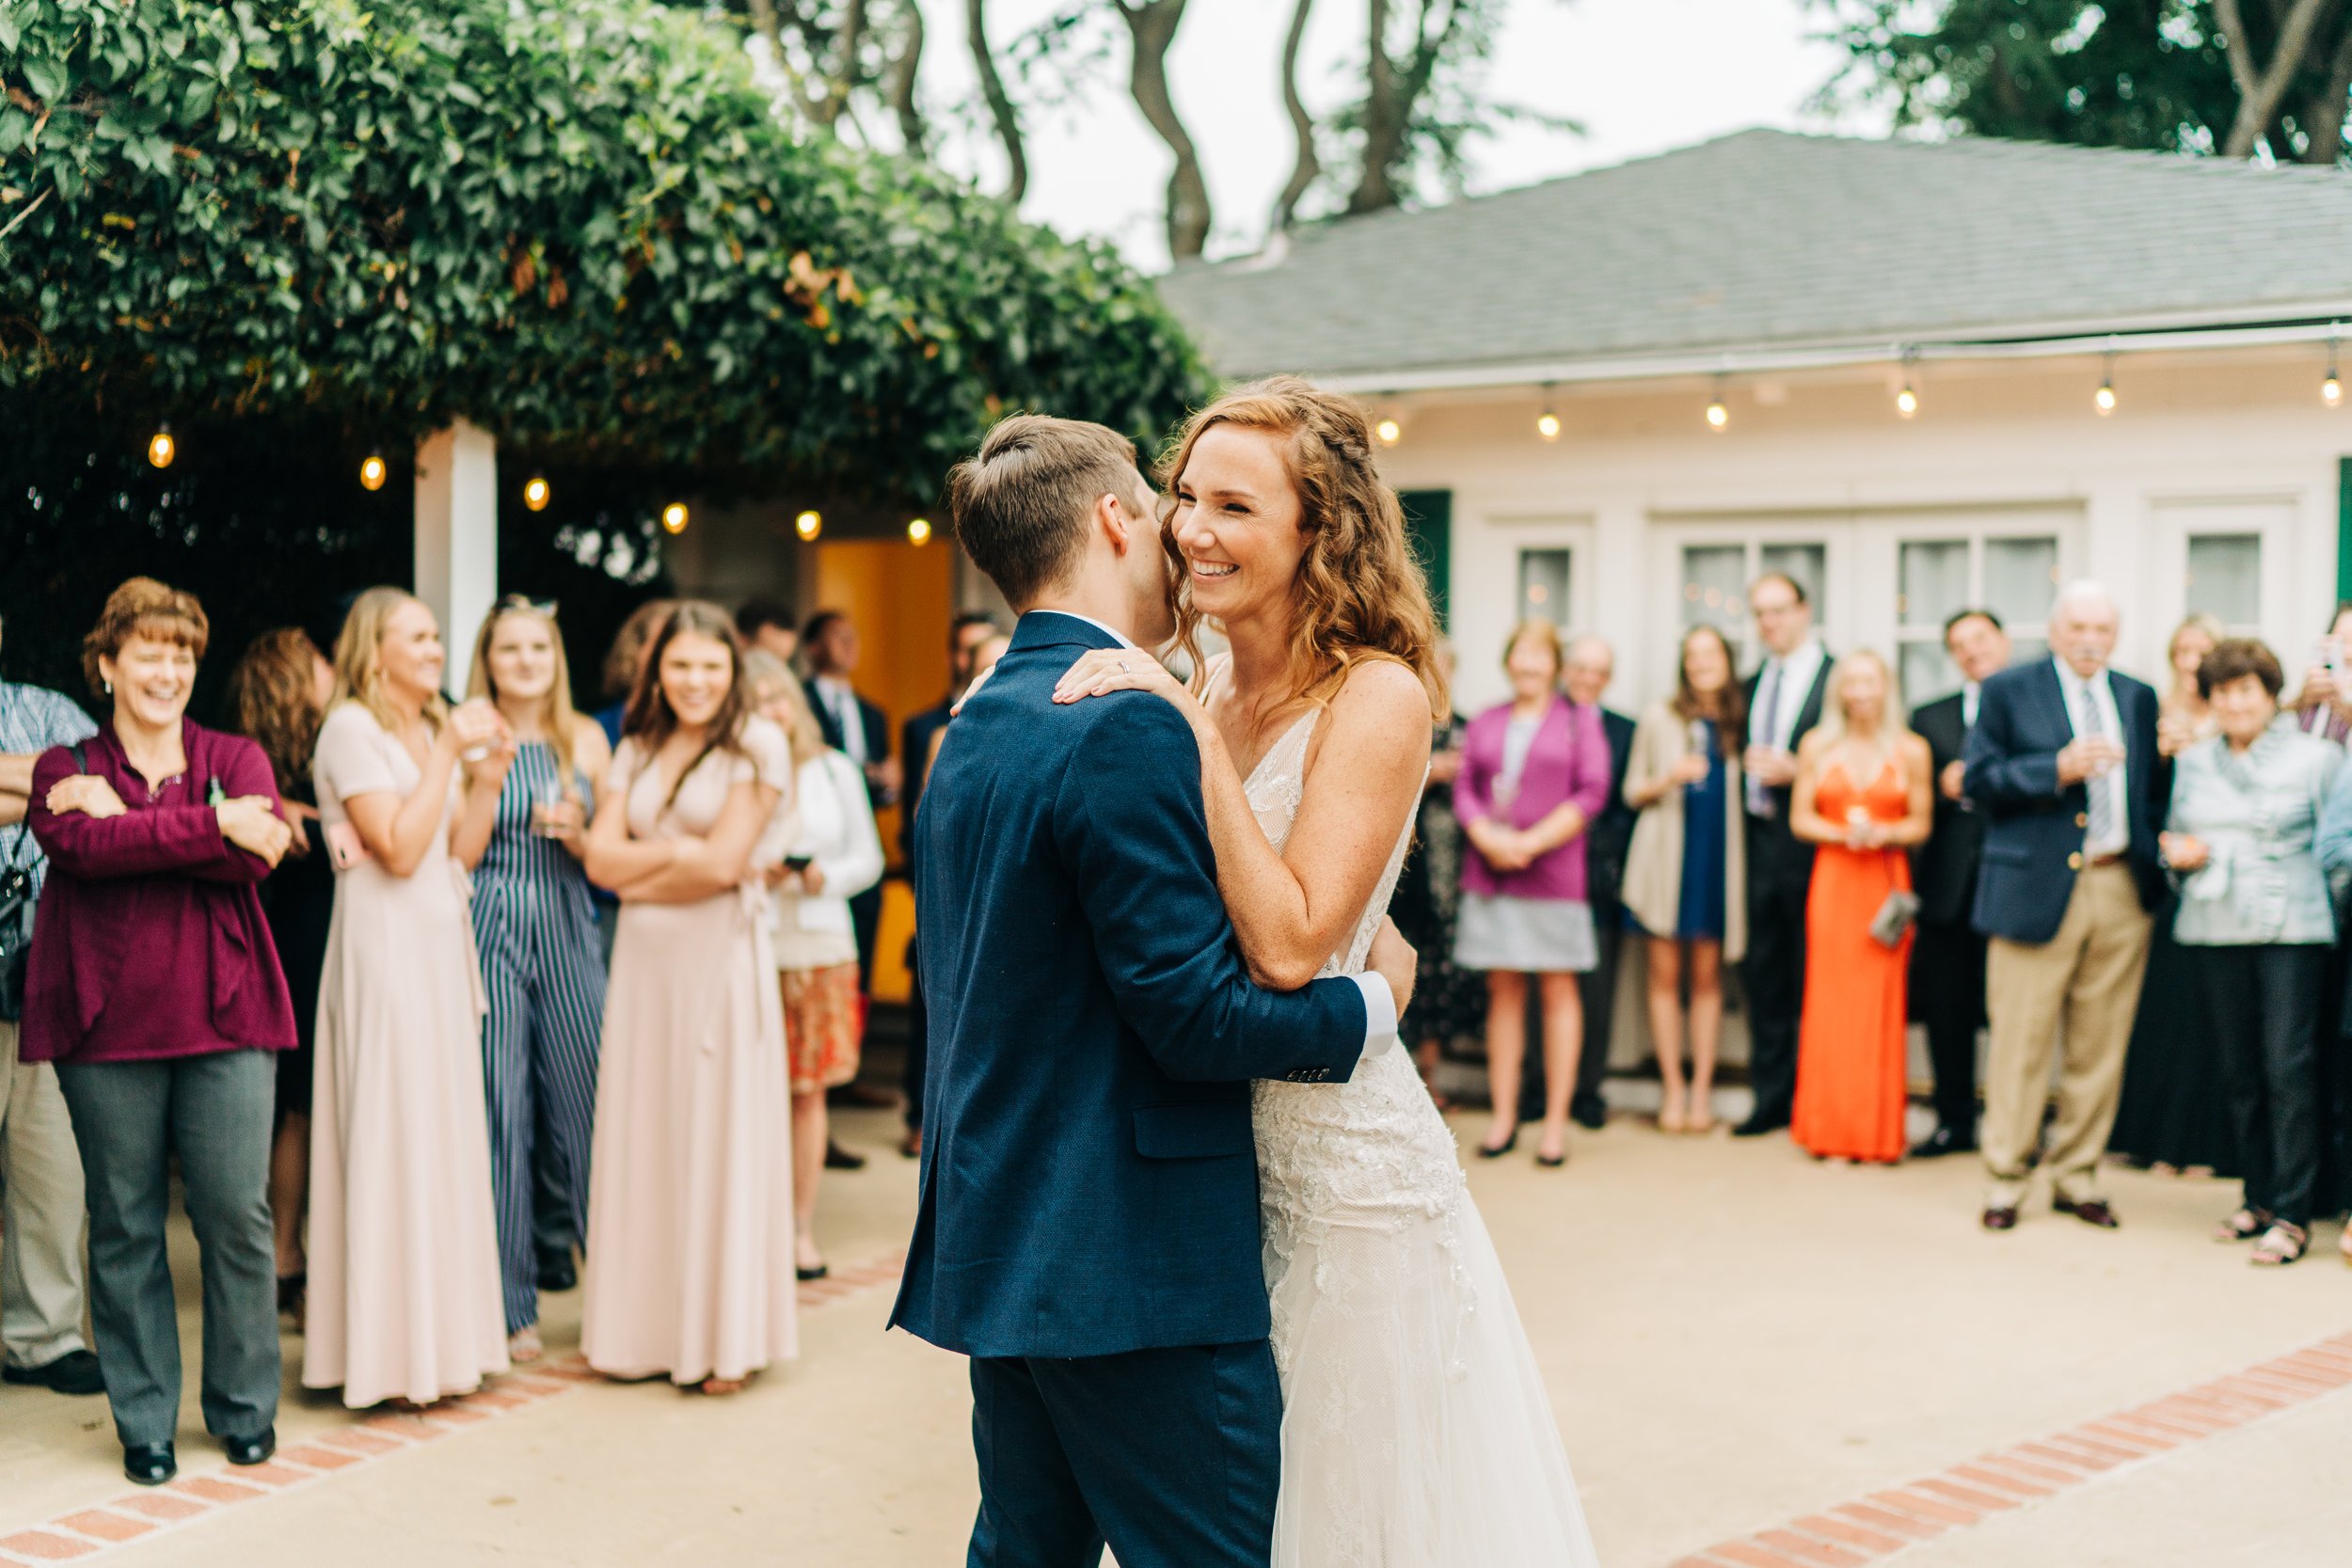 www.santabarbarawedding.com | Brandon Bibbins Photography | The Cottages at Polo Run | Bride and Groom First Dance